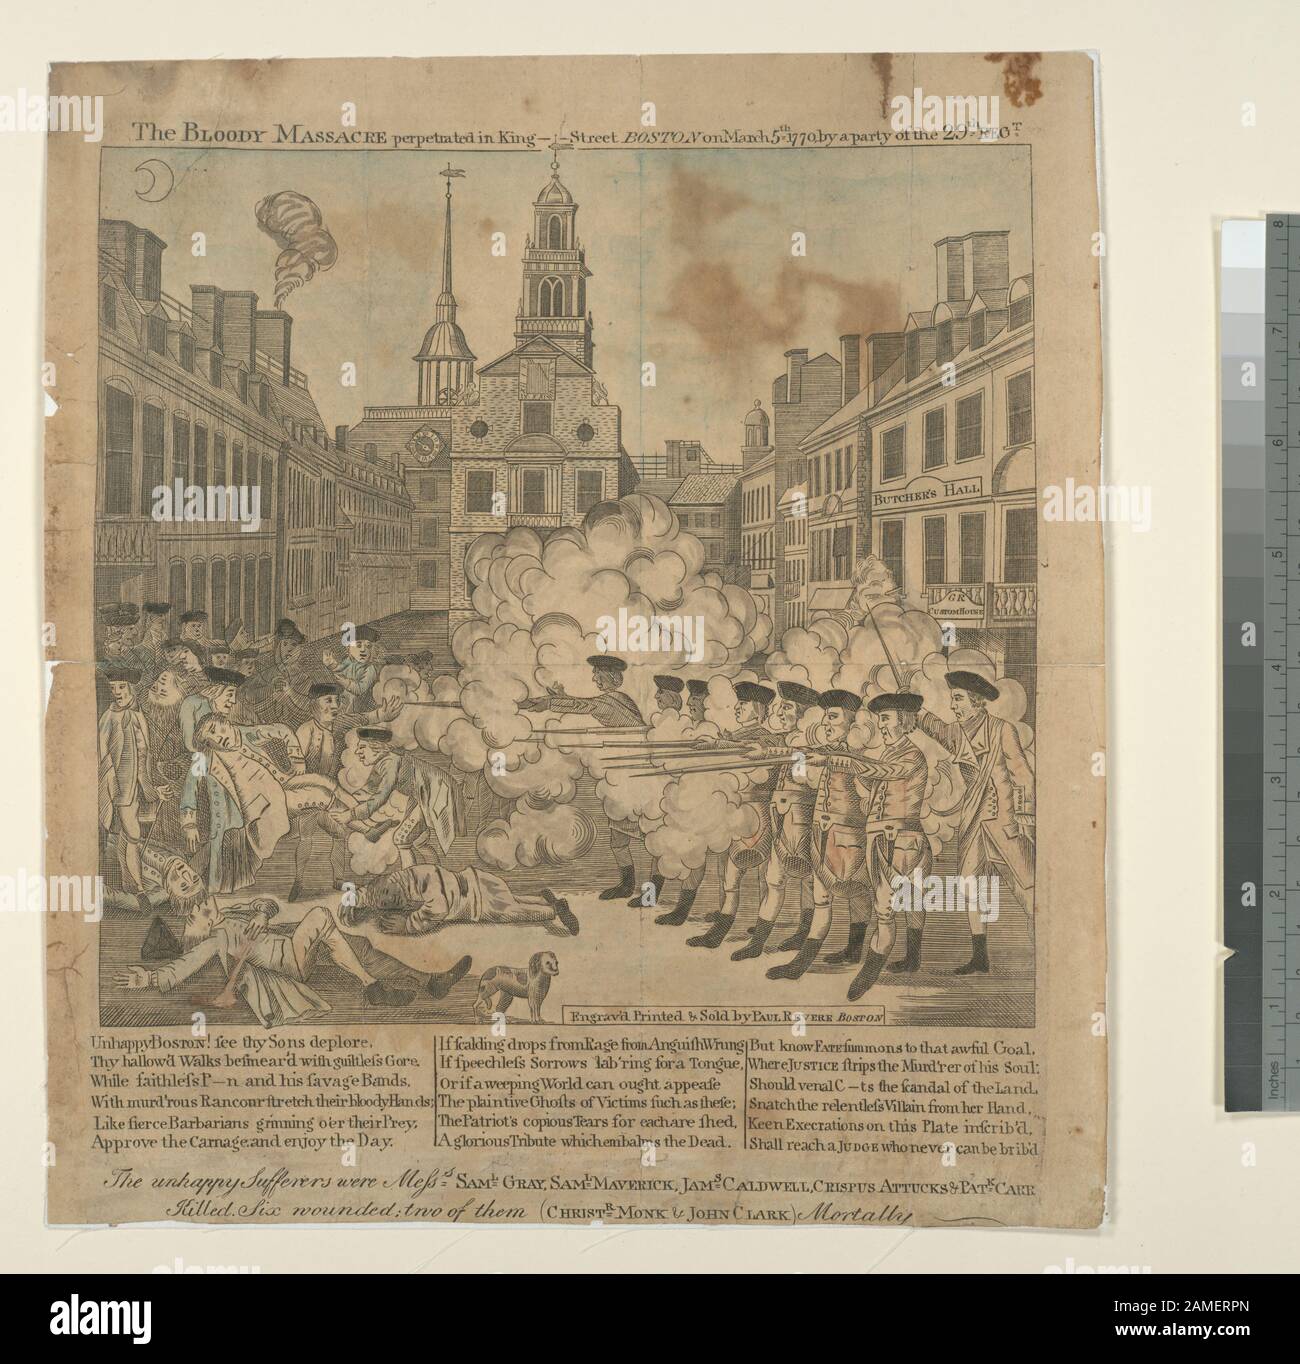 The bloody massacre perpetrated in King-Street, Boston on March 5th 1770, by a party of the 29th regt  Stokes 1770-C-10 Print contains 3 stanzas of poetry in the lower margin. Print depicts March 5, 1770. See also Deák 127. Anonymous 1832 color engraving after Paul Revere's engraving published in 1770. Copied from the more elaborate engraving by Henry Pelham shown as entry 127 Deák 128; The bloody massacre perpetrated in King-Street, Boston on March 5th 1770, by a party of the 29th regt. Stock Photo